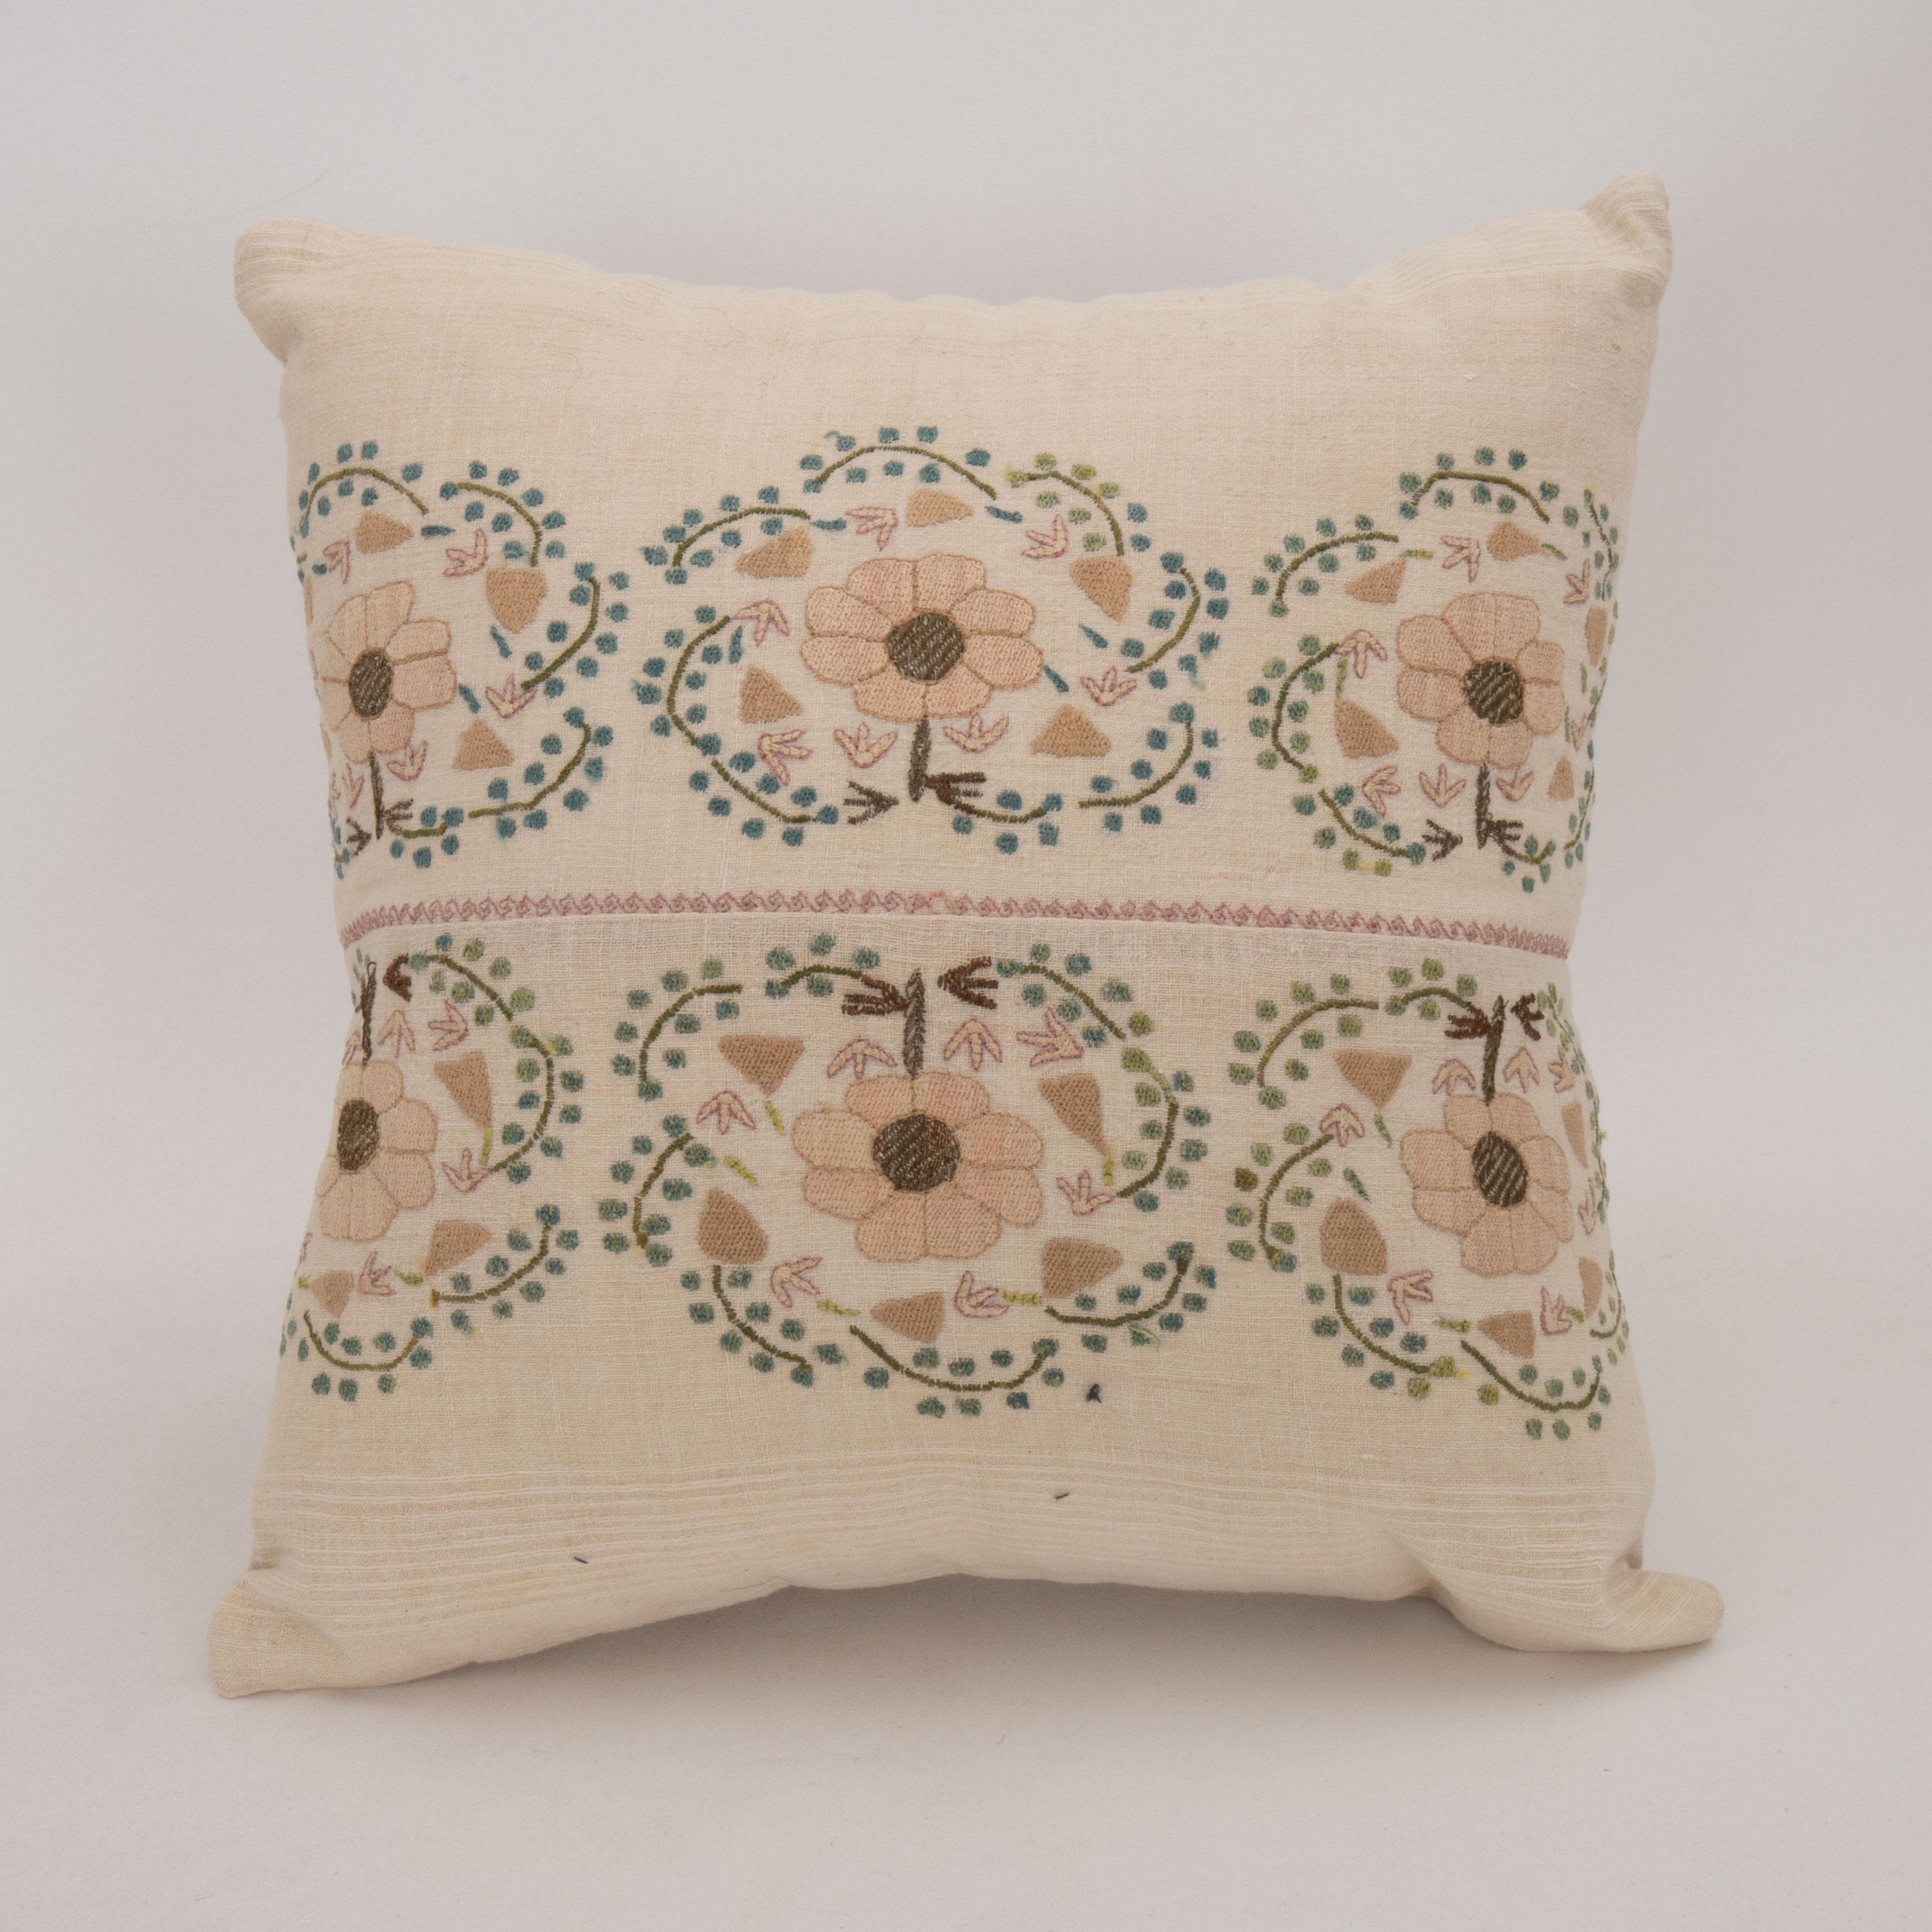 Suzani Pillow Case Made from an Antique Ottoman Embroidery For Sale